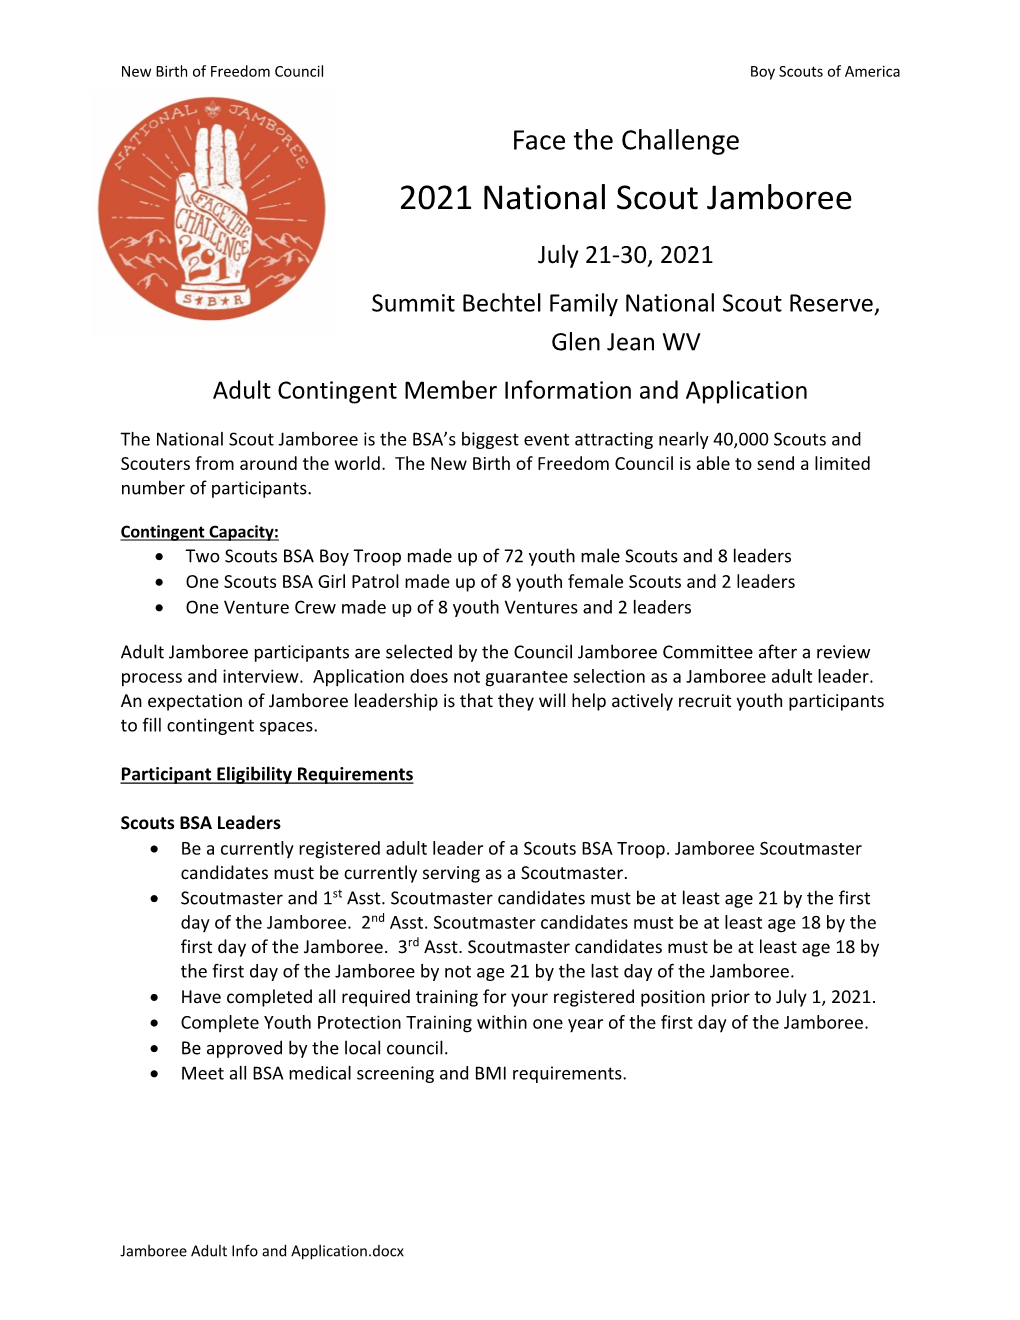 2021 National Scout Jamboree July 21-30, 2021 Summit Bechtel Family National Scout Reserve, Glen Jean WV Adult Contingent Member Information and Application